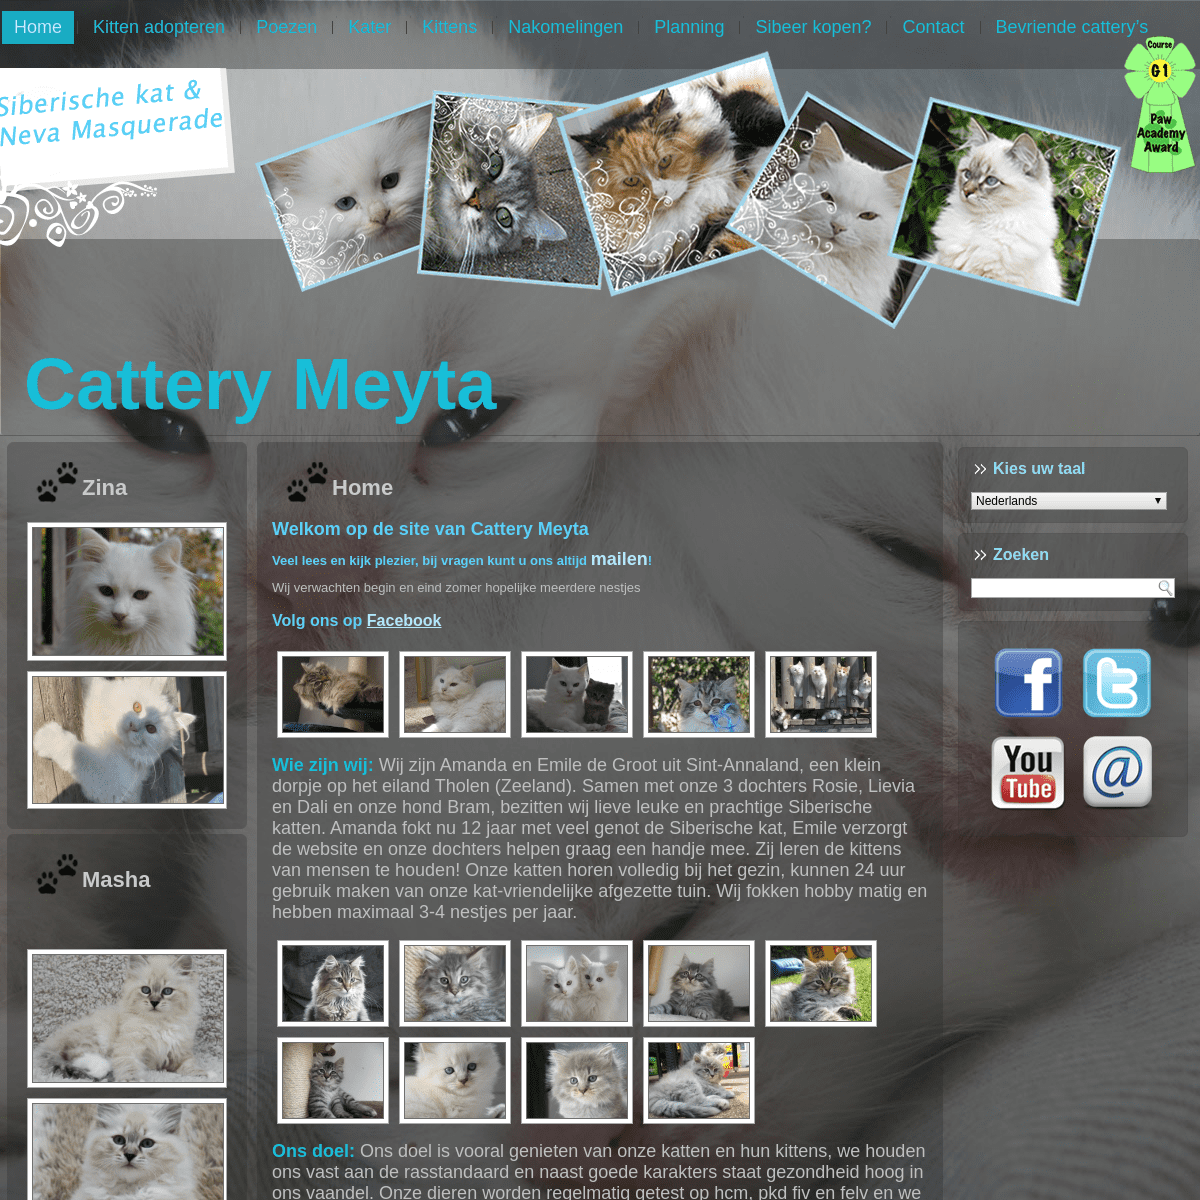 A complete backup of meyta-cattery.nl